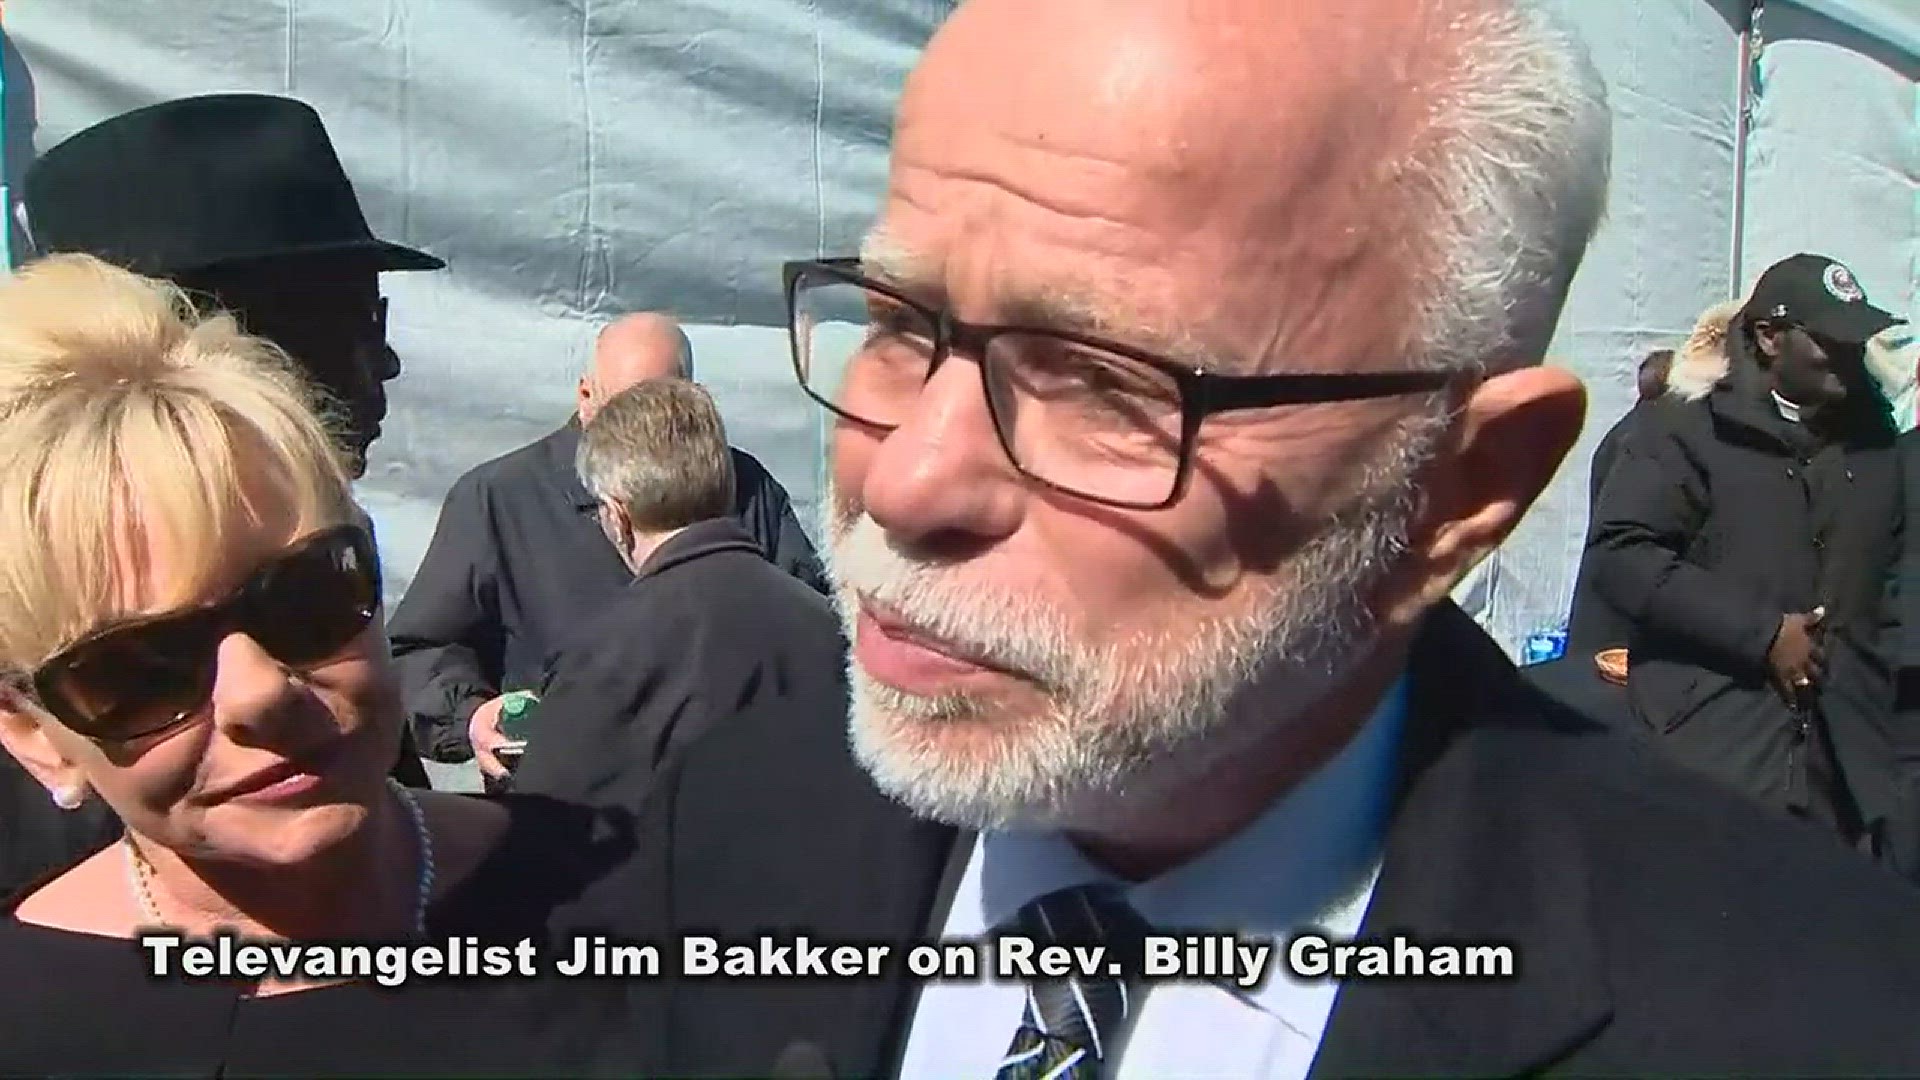 Televangelist Jim Bakker was moved to tears when he talked about the influence Rev. Graham had on him.